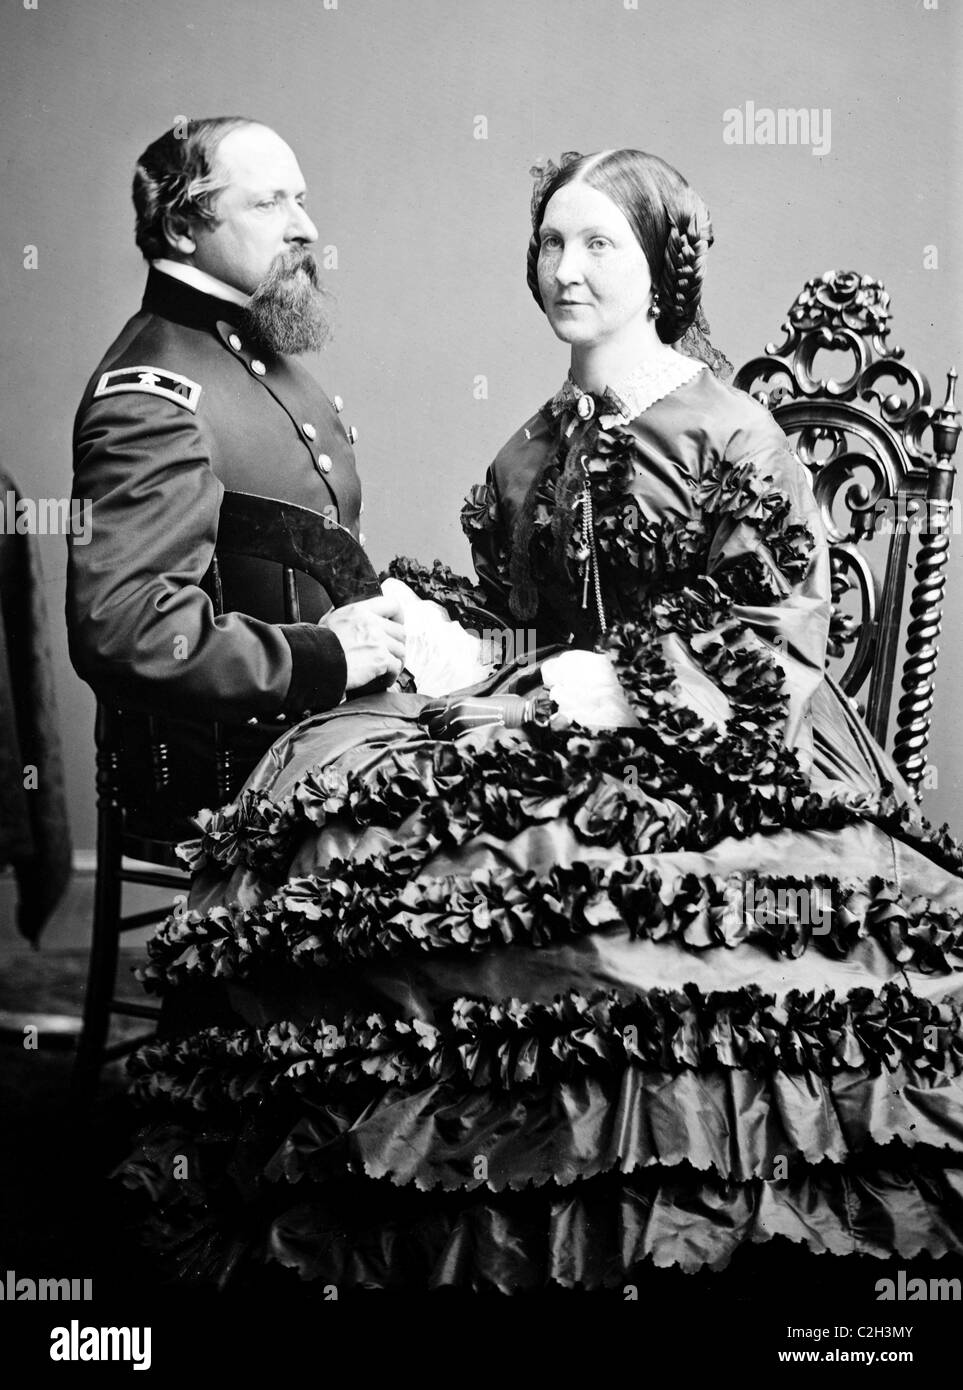 James Brewerton Ricketts (and his wife, Fannie) was a career officer in the United States Army during the American Civil War. Stock Photo